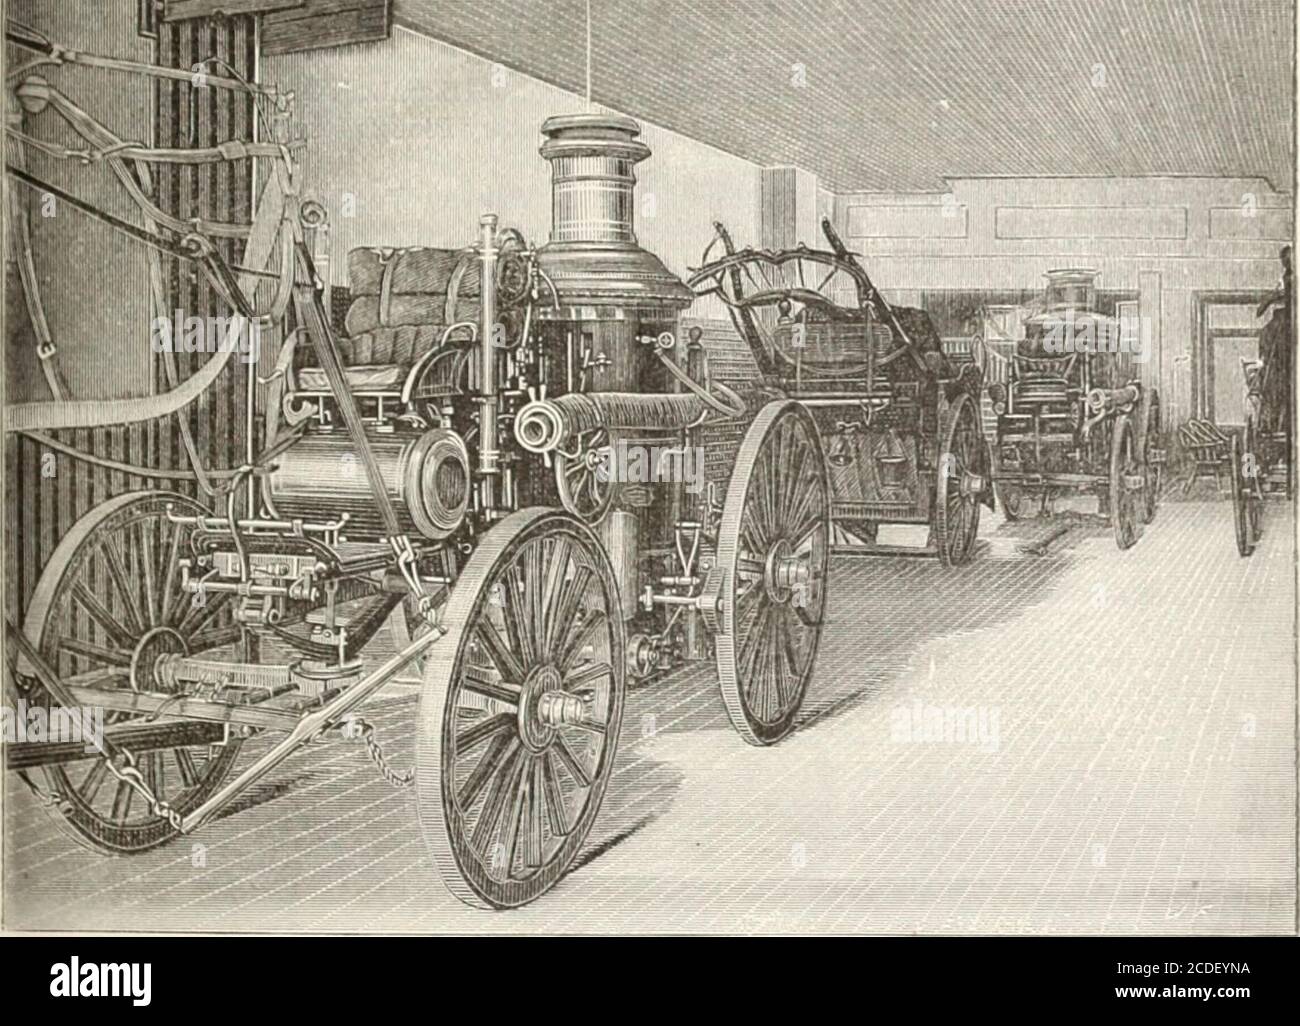 . Our firemen. A history of the New York fire departments, volunteer and paid ... 650 engravings; 350 biographies. . ynch, JamesLavelle. Suburban Company No. 40 organized partly on a volunteer basis—the company being paid OH R K 1 It K M K N a lump sum per annum, and the members following their usual avocations—October 30, 1865.at Carmansville, in quarters of Fort Washington Engine No. 27. Had a hand engine. Foreman, William Harris, Jr. ; assistant foreman, George Kirkland ; firemen, Charles H.Robinson, John Short, James liuckridge, Edward Scallon, Resolved (iardner, Jame &lt;C)Rourke,Charles Stock Photo